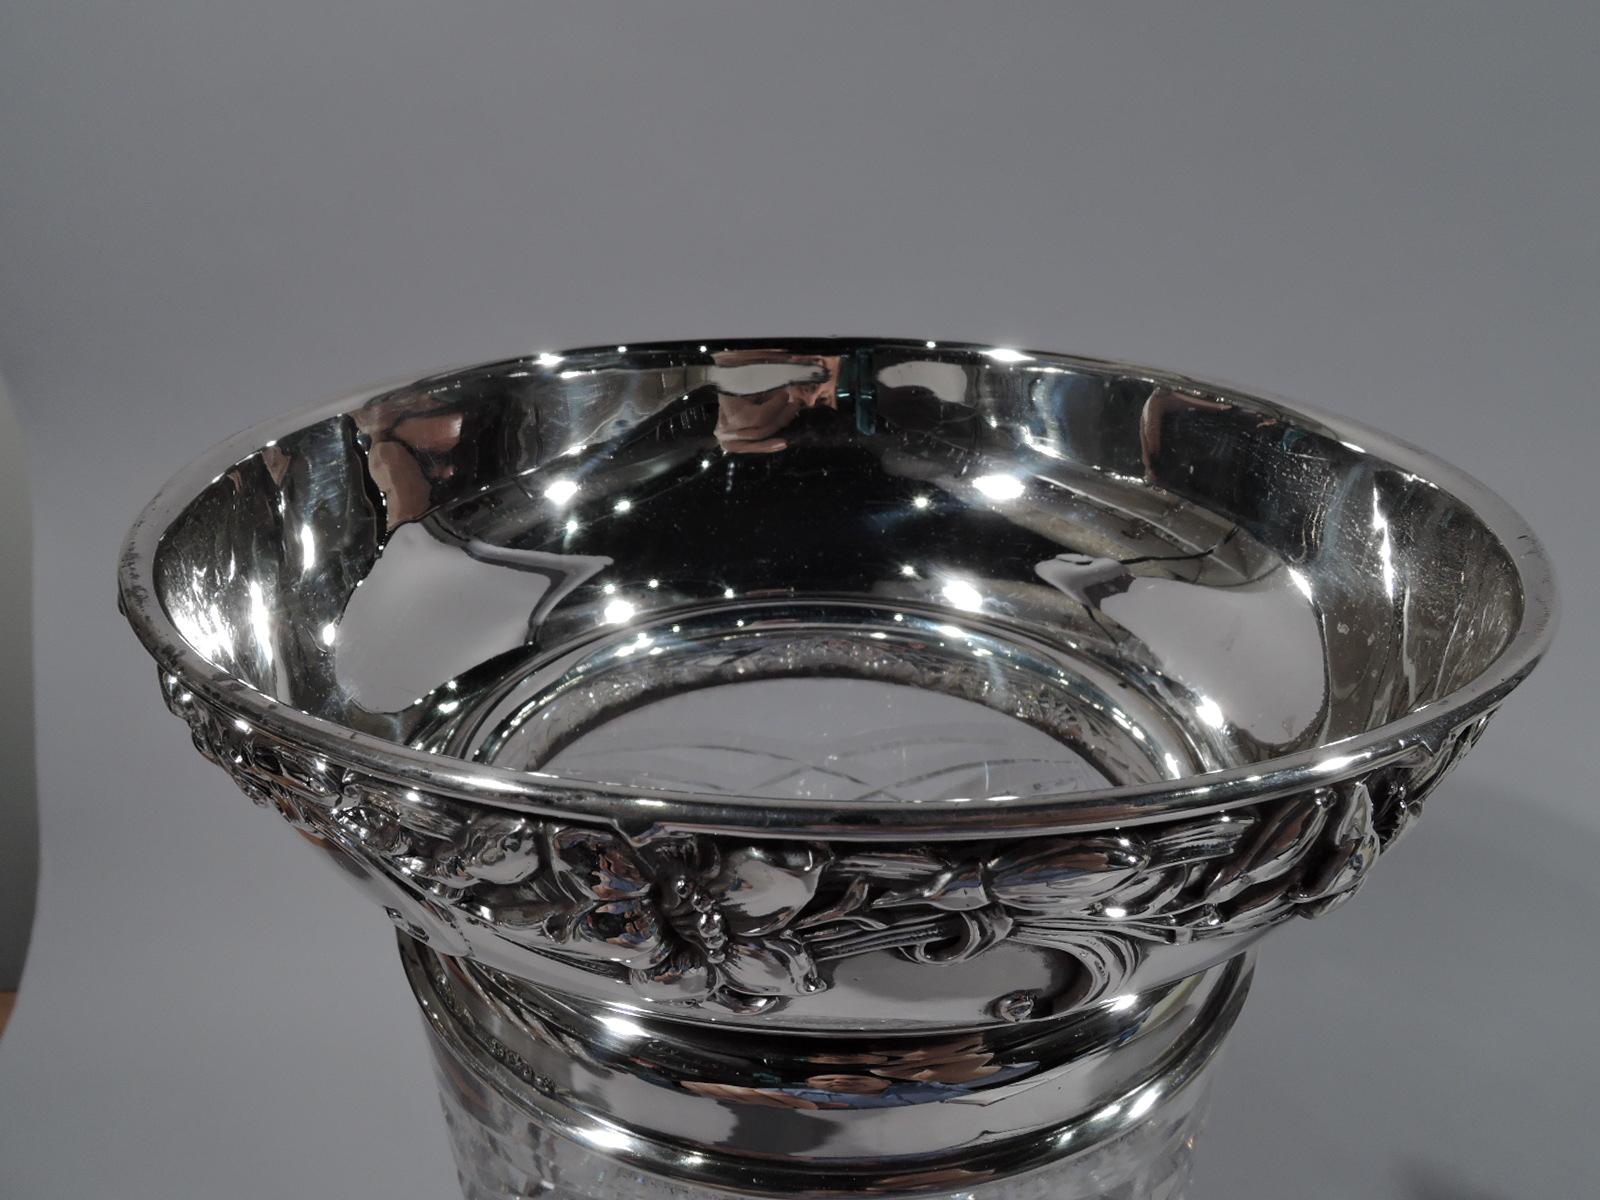 American brilliant-cut glass vase with sterling silver collar. Made by Gorham in Providence in 1907. Waisted cylinder with dense stars, ferns, and diaper ornament. Collar and curved and wide mouth applied with loose and entwined flowers. Fully